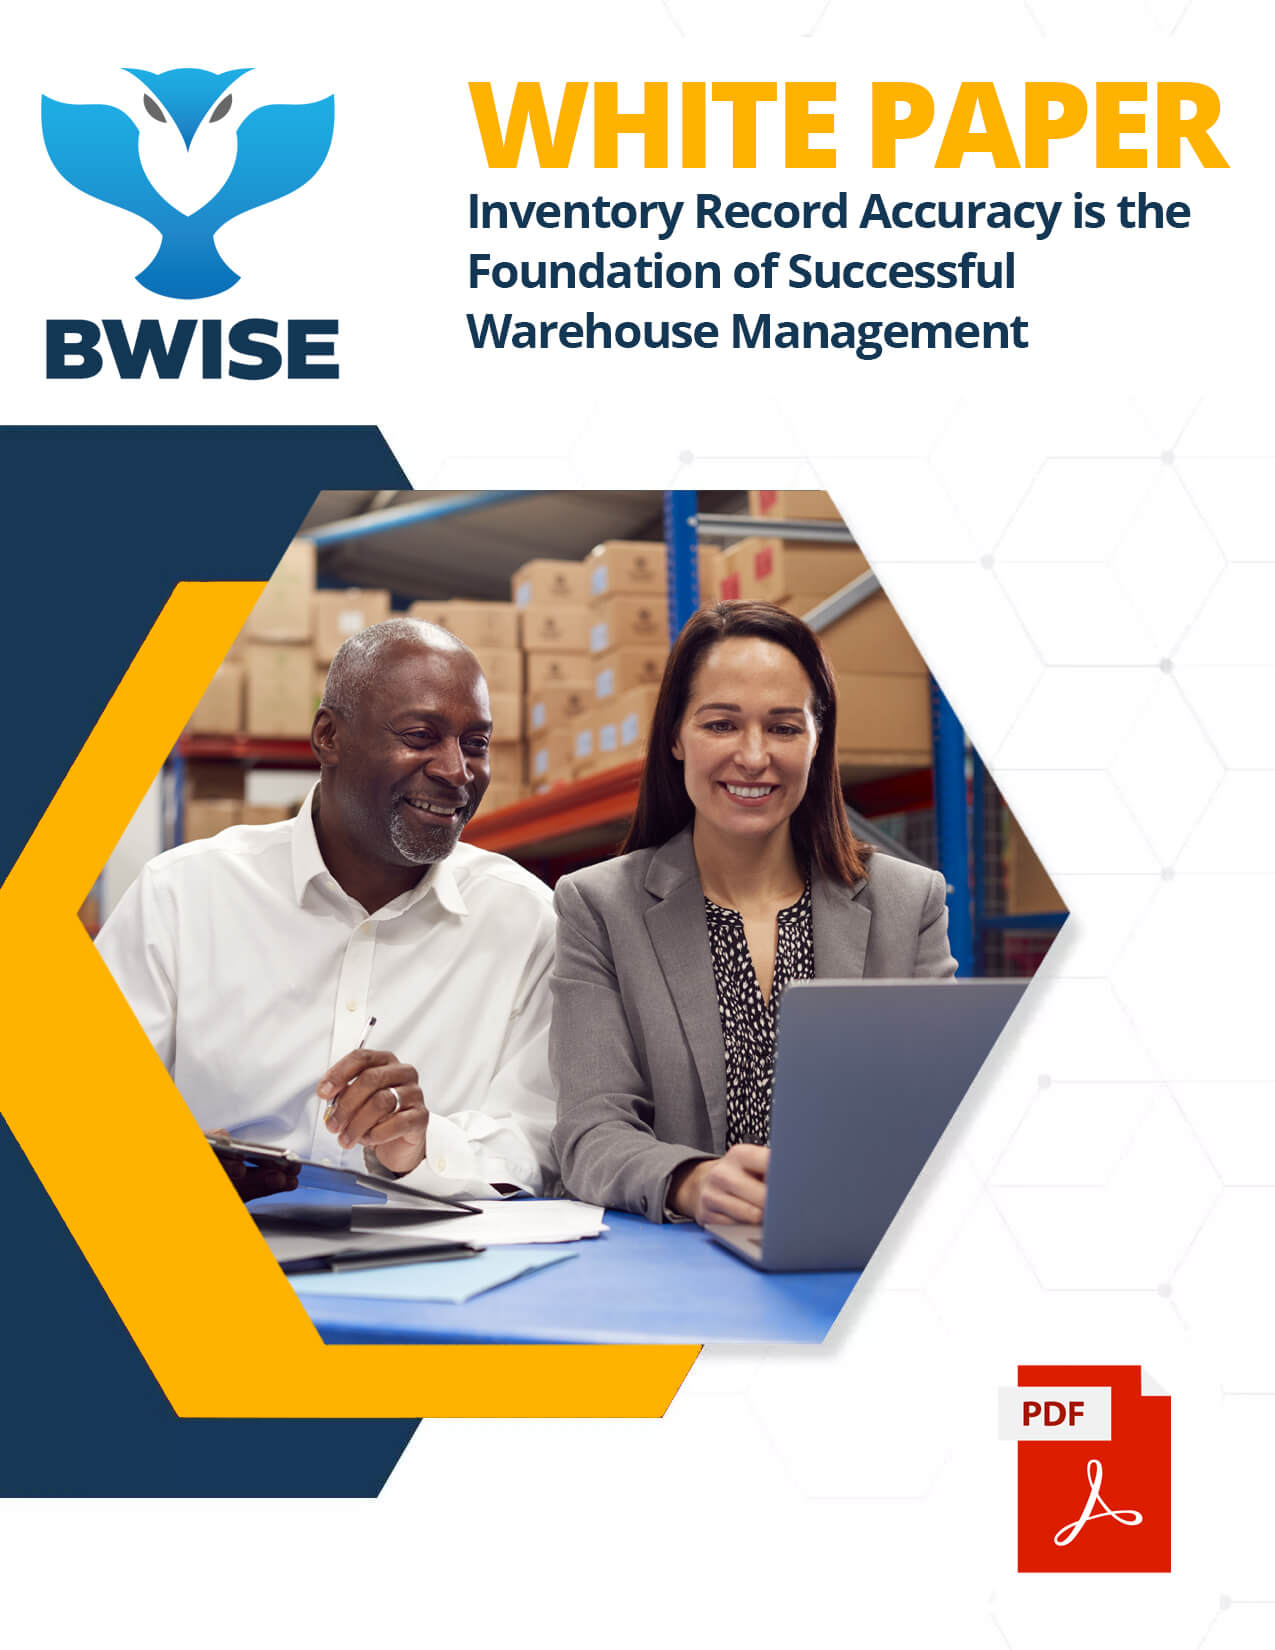 Inventory record accuracy is the foundation of successful warehouse management